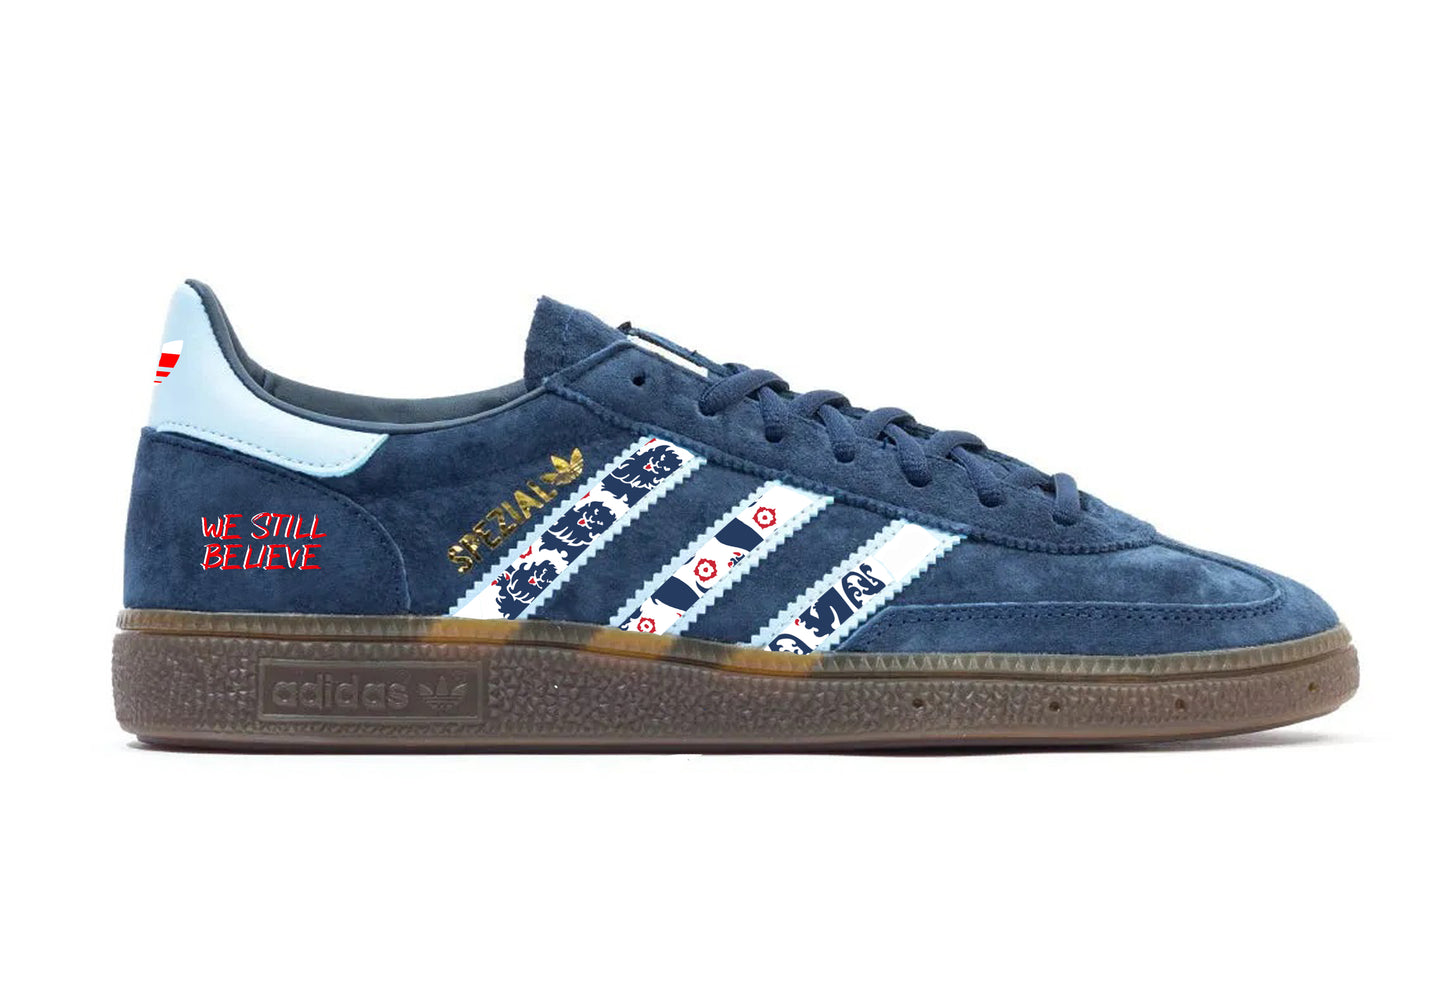 Limited edition Adidas England 3 lions dark blue spezial trainers / sneakers